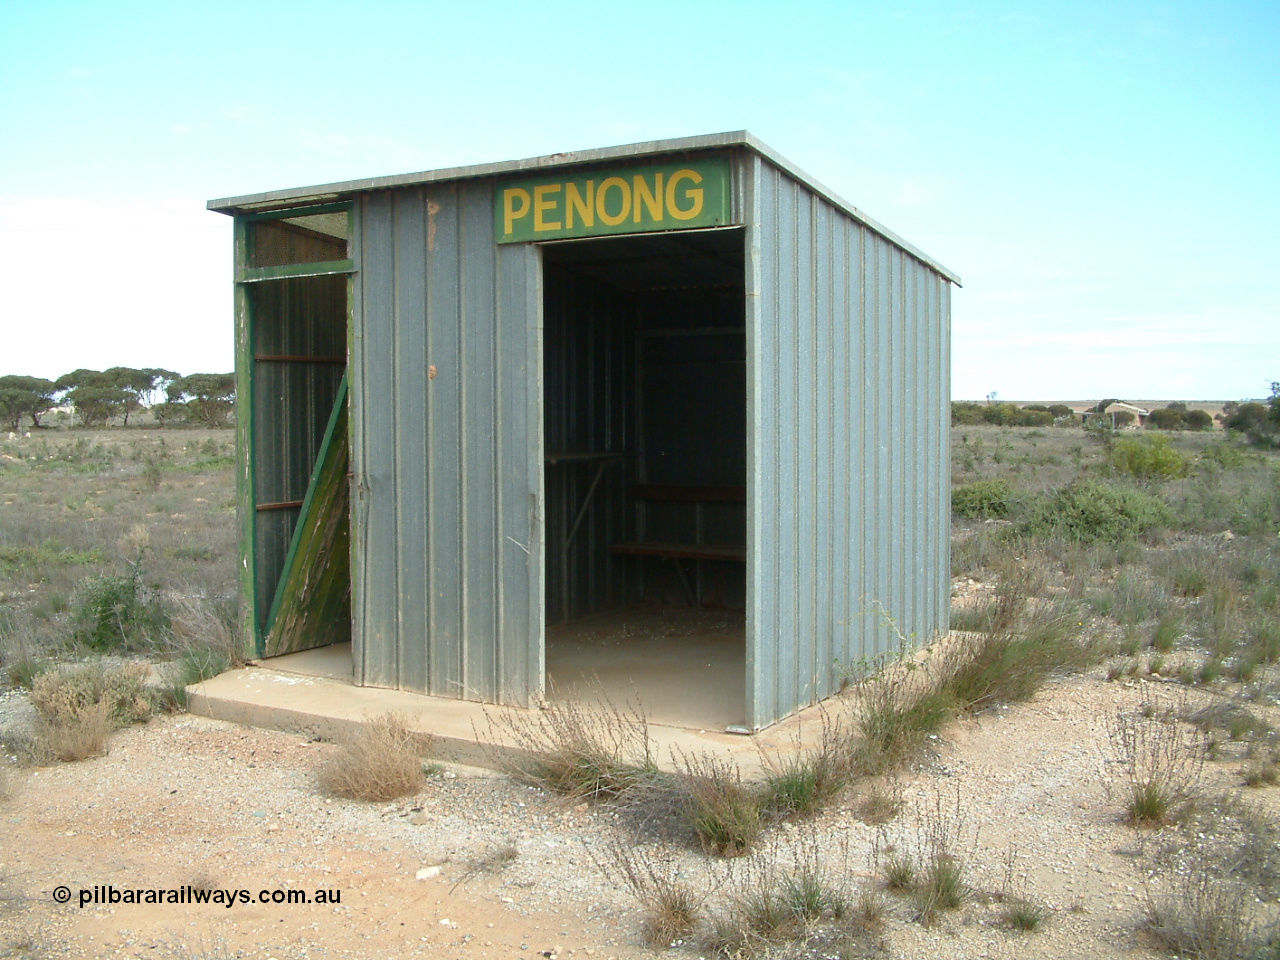 030414 154420
Penong station shelter shed. , last train in March 1997.
